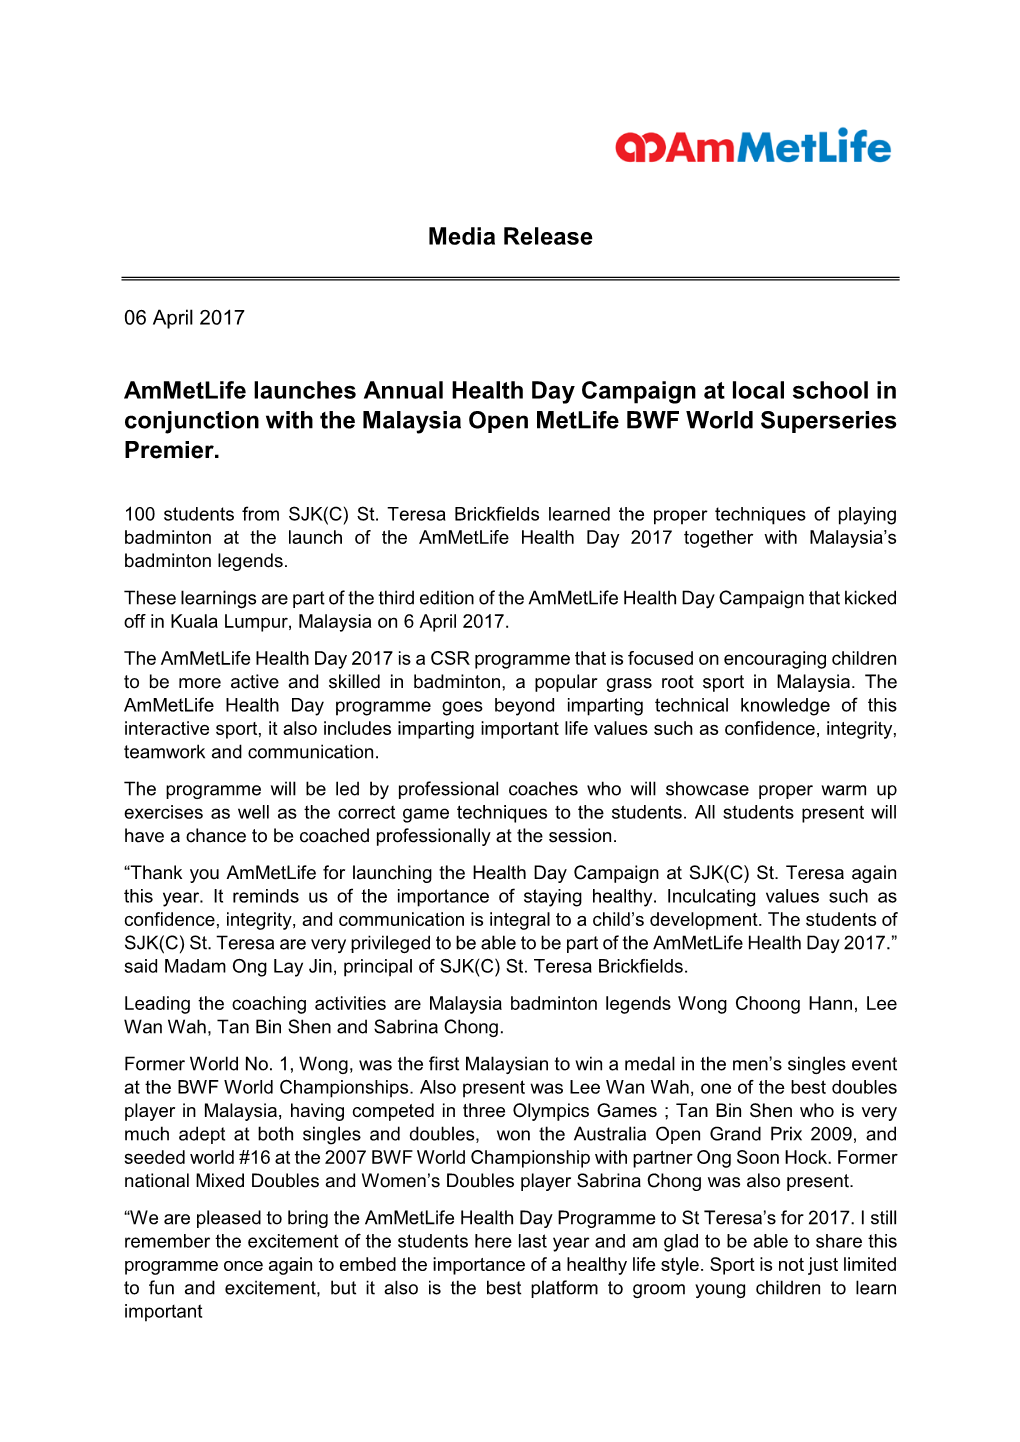 Ammetlife Launches Annual Health Day Campaign at Local School in Conjunction with the Malaysia Open Metlife BWF World Superseries Premier